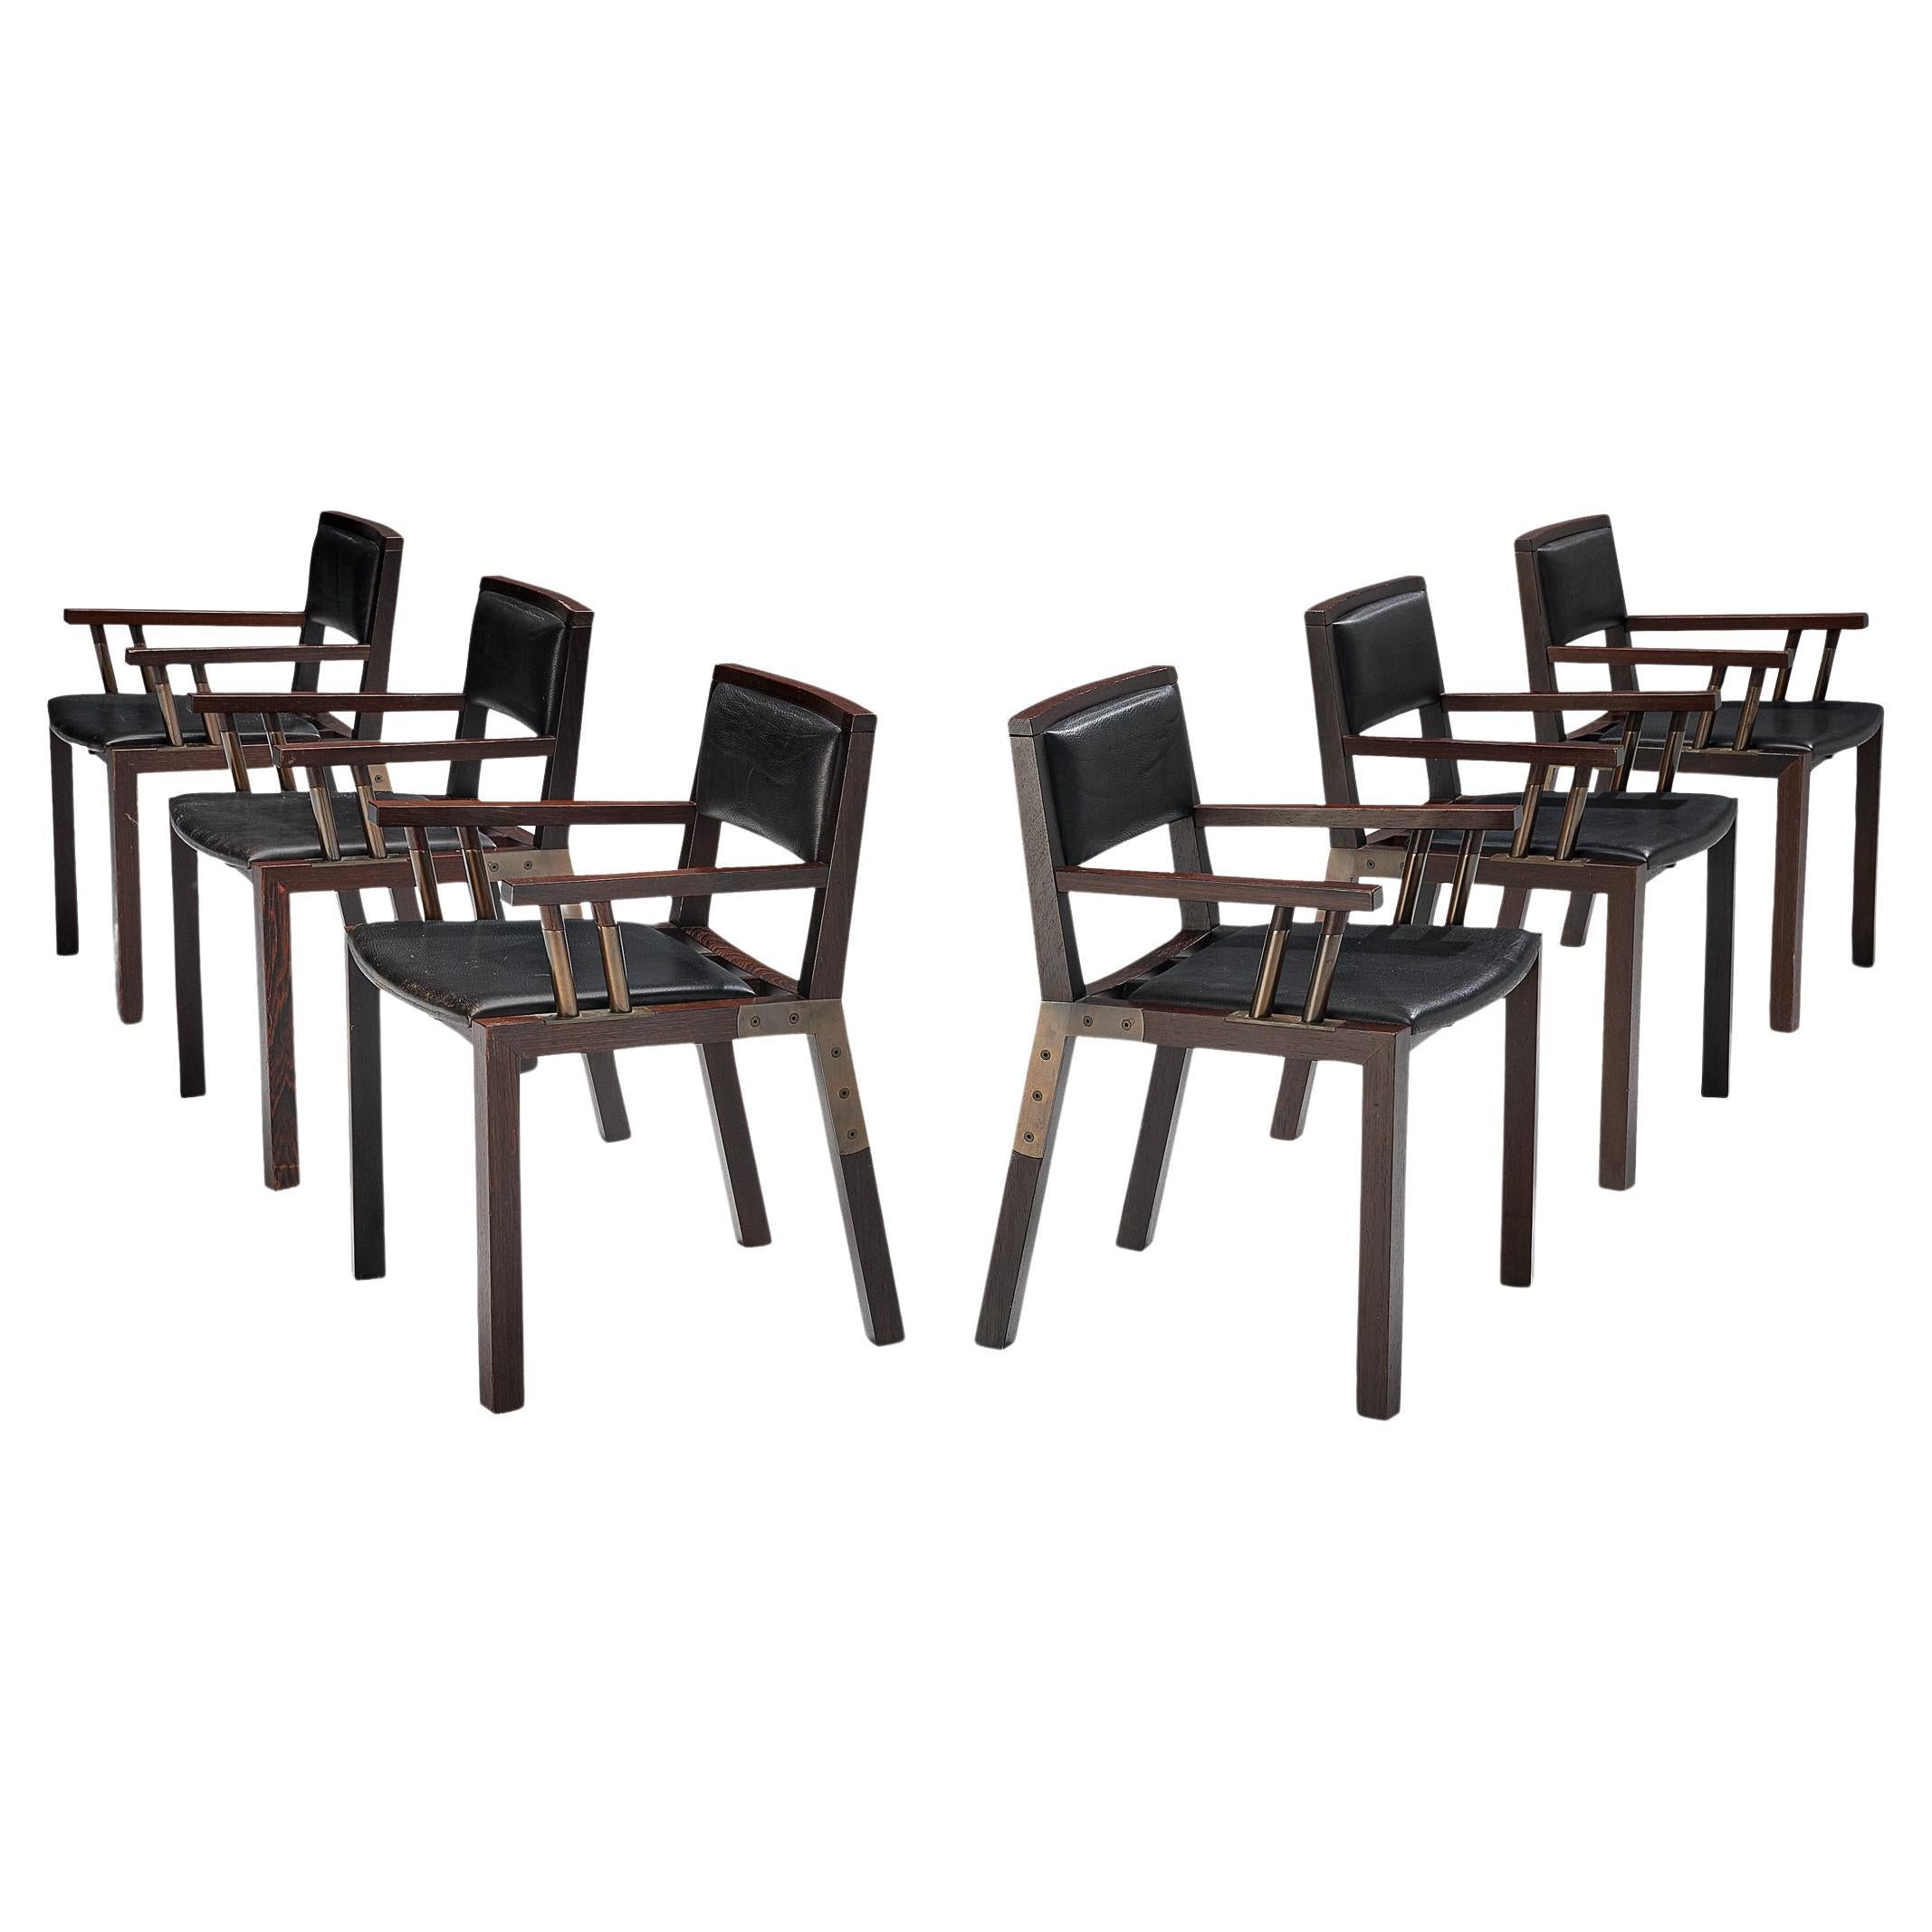 Rare Jean-Michel Wilmotte ‘Grand Louvre’ Set of Six Dining Chairs in Wenge 